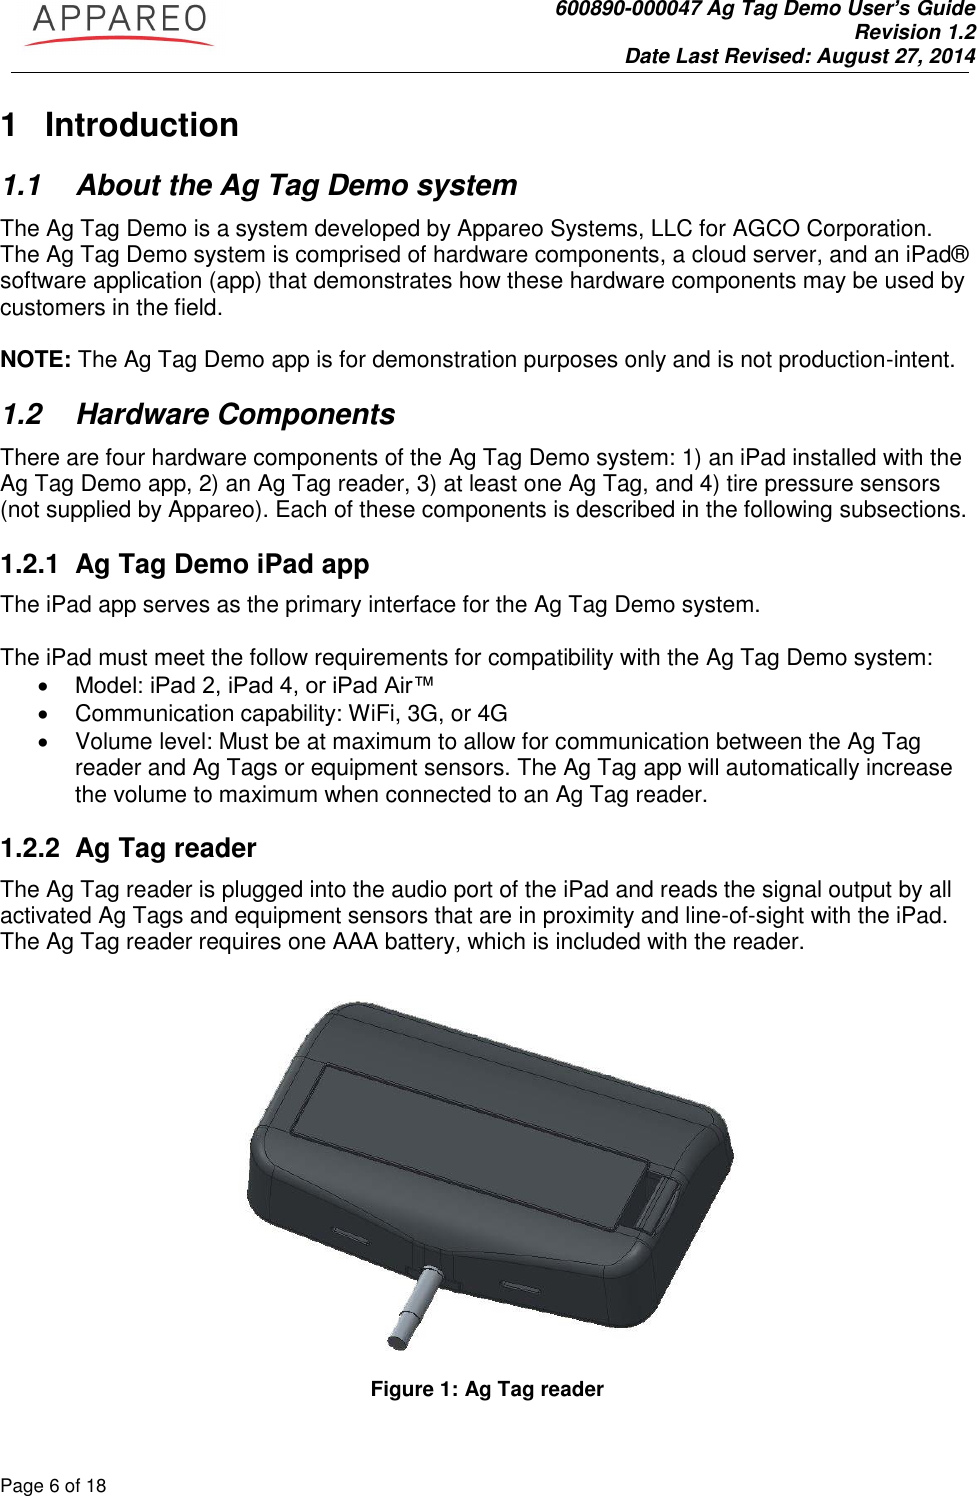               600890-000047 Ag Tag Demo User’s Guide   Revision 1.2 Date Last Revised: August 27, 2014 Page 6 of 18       1  Introduction 1.1  About the Ag Tag Demo system The Ag Tag Demo is a system developed by Appareo Systems, LLC for AGCO Corporation. The Ag Tag Demo system is comprised of hardware components, a cloud server, and an iPad® software application (app) that demonstrates how these hardware components may be used by customers in the field.   NOTE: The Ag Tag Demo app is for demonstration purposes only and is not production-intent.  1.2  Hardware Components There are four hardware components of the Ag Tag Demo system: 1) an iPad installed with the Ag Tag Demo app, 2) an Ag Tag reader, 3) at least one Ag Tag, and 4) tire pressure sensors (not supplied by Appareo). Each of these components is described in the following subsections. 1.2.1 Ag Tag Demo iPad app The iPad app serves as the primary interface for the Ag Tag Demo system.   The iPad must meet the follow requirements for compatibility with the Ag Tag Demo system:  Model: iPad 2, iPad 4, or iPad Air™   Communication capability: WiFi, 3G, or 4G    Volume level: Must be at maximum to allow for communication between the Ag Tag reader and Ag Tags or equipment sensors. The Ag Tag app will automatically increase the volume to maximum when connected to an Ag Tag reader.   1.2.2 Ag Tag reader The Ag Tag reader is plugged into the audio port of the iPad and reads the signal output by all activated Ag Tags and equipment sensors that are in proximity and line-of-sight with the iPad. The Ag Tag reader requires one AAA battery, which is included with the reader.    Figure 1: Ag Tag reader 